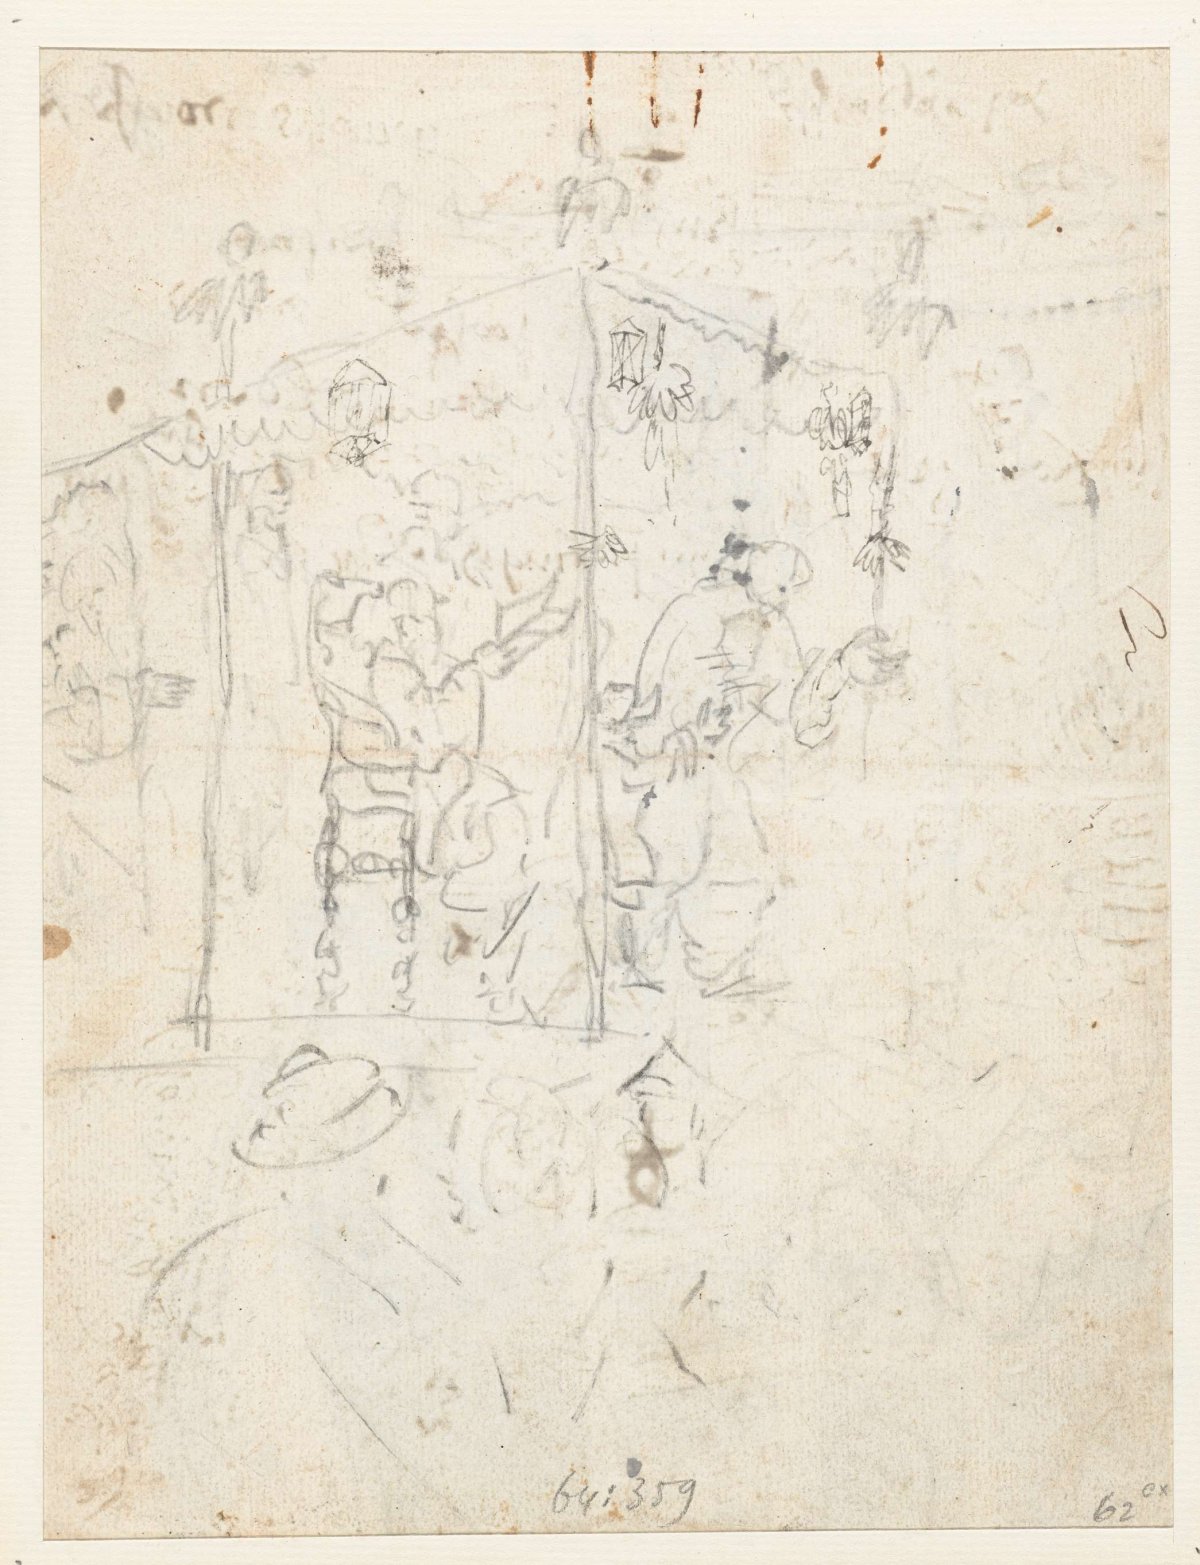 Sketch of persons in a cabin, Wouter Schouten, c. 1660